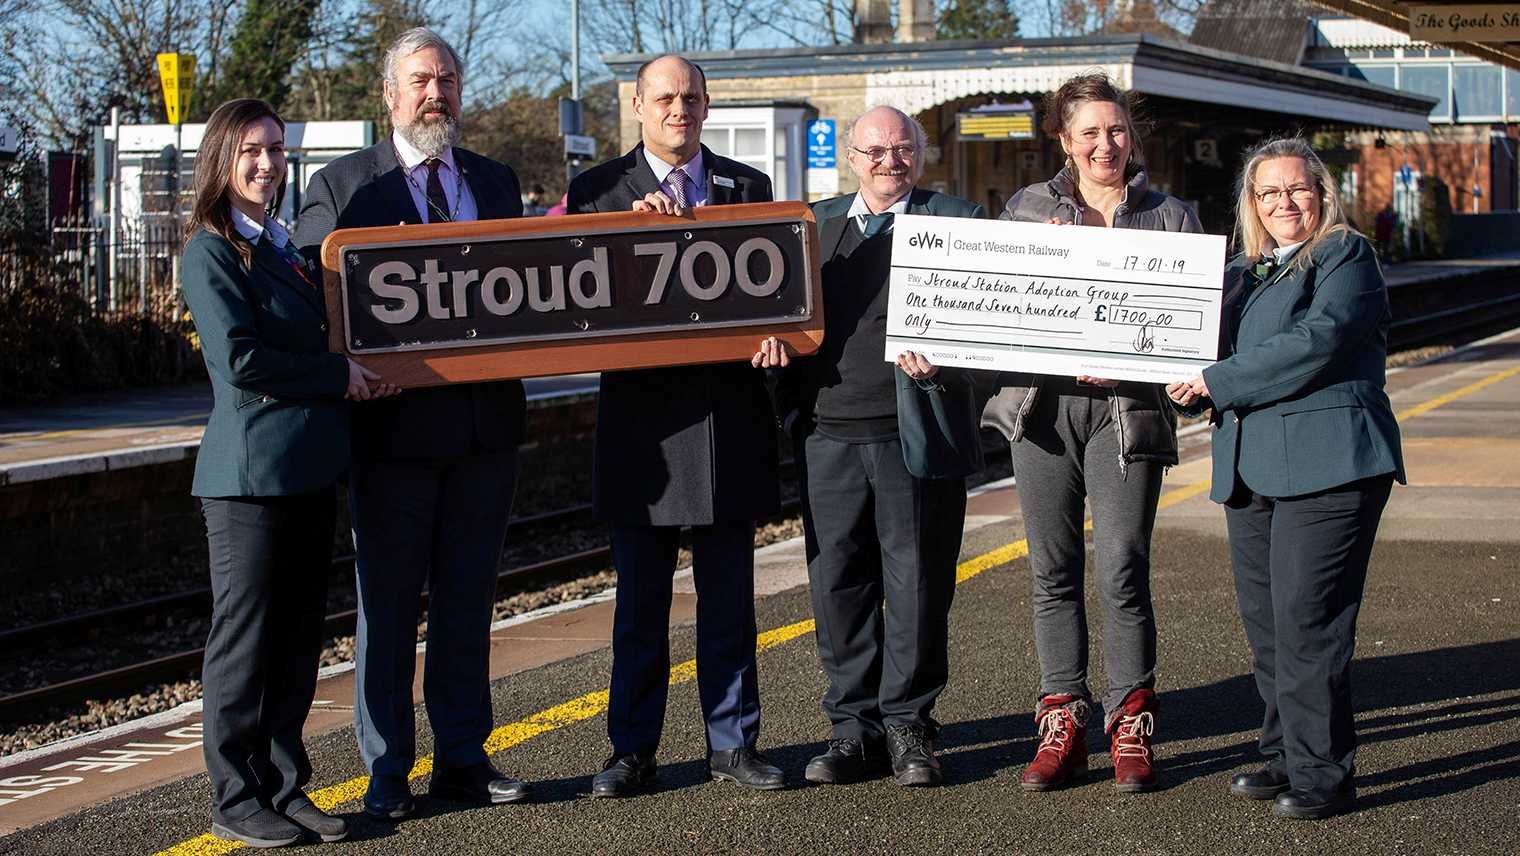 Dignitaries pose for photograph with Stroud 700 nameplate and cheque